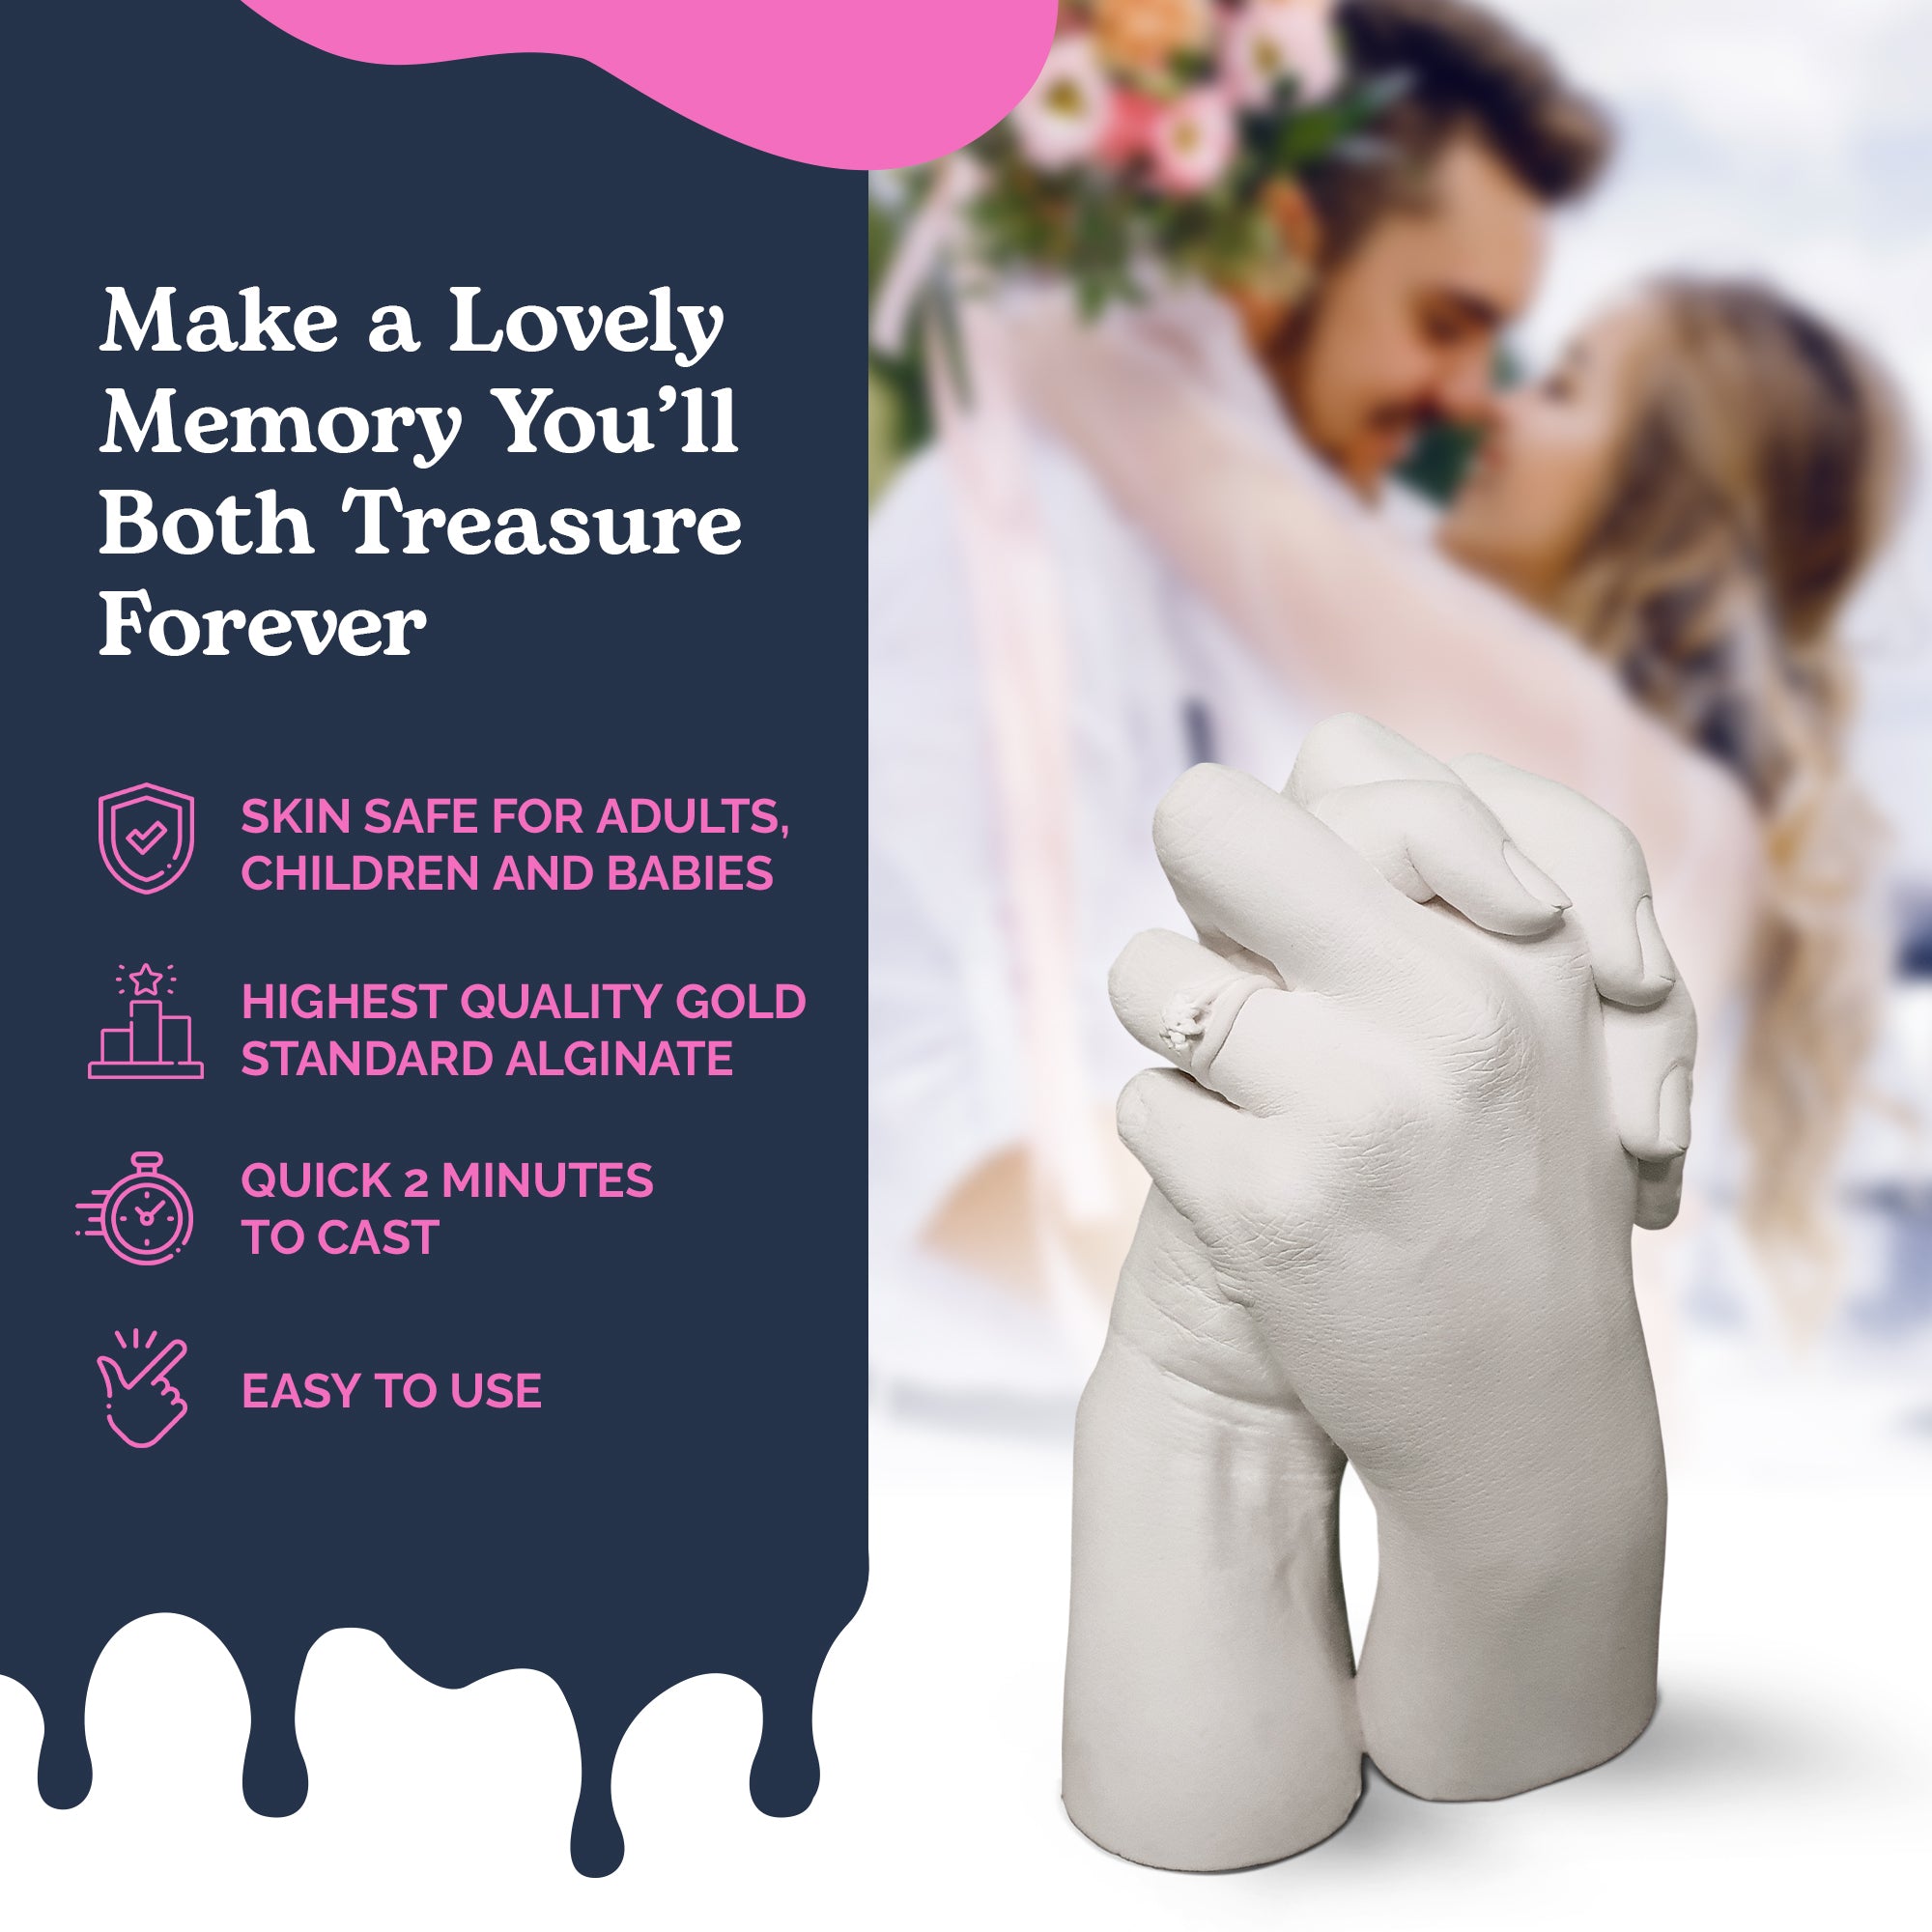 Edinburgh Eco-Friendly DIY Couples Hand Casting Kit - Make A Cast of Your Hands - Preserve A Loved One's Hand - Unique Wedding, Anniversary